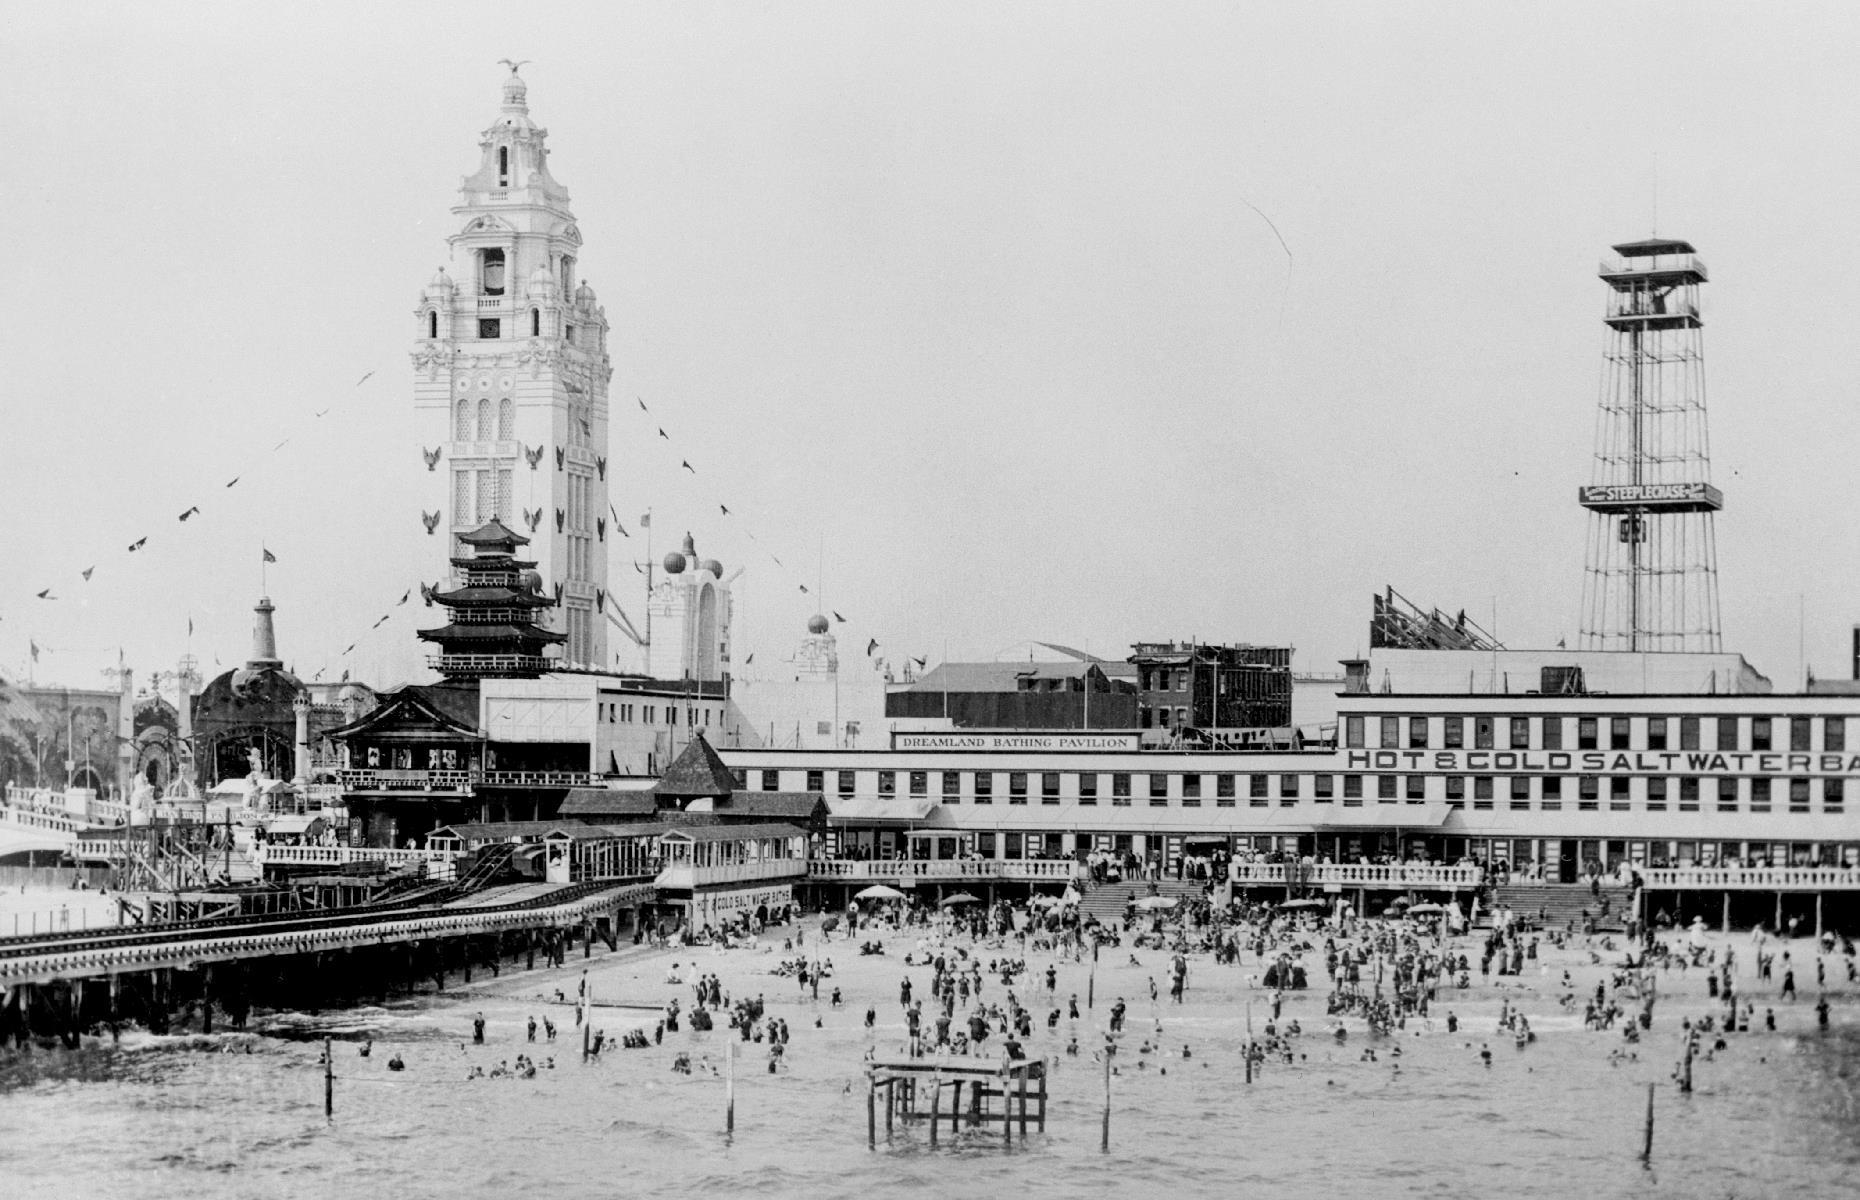 Perhaps no place is more synonymous with the American summer vacations of yore than New York's Coney Island, which began attracting vacationers back in the 19th century. This pleasure-seeker's playground is captured here in the early 1900s. The large tower in the background belonged to Dreamland, one of the area's three original theme parks.